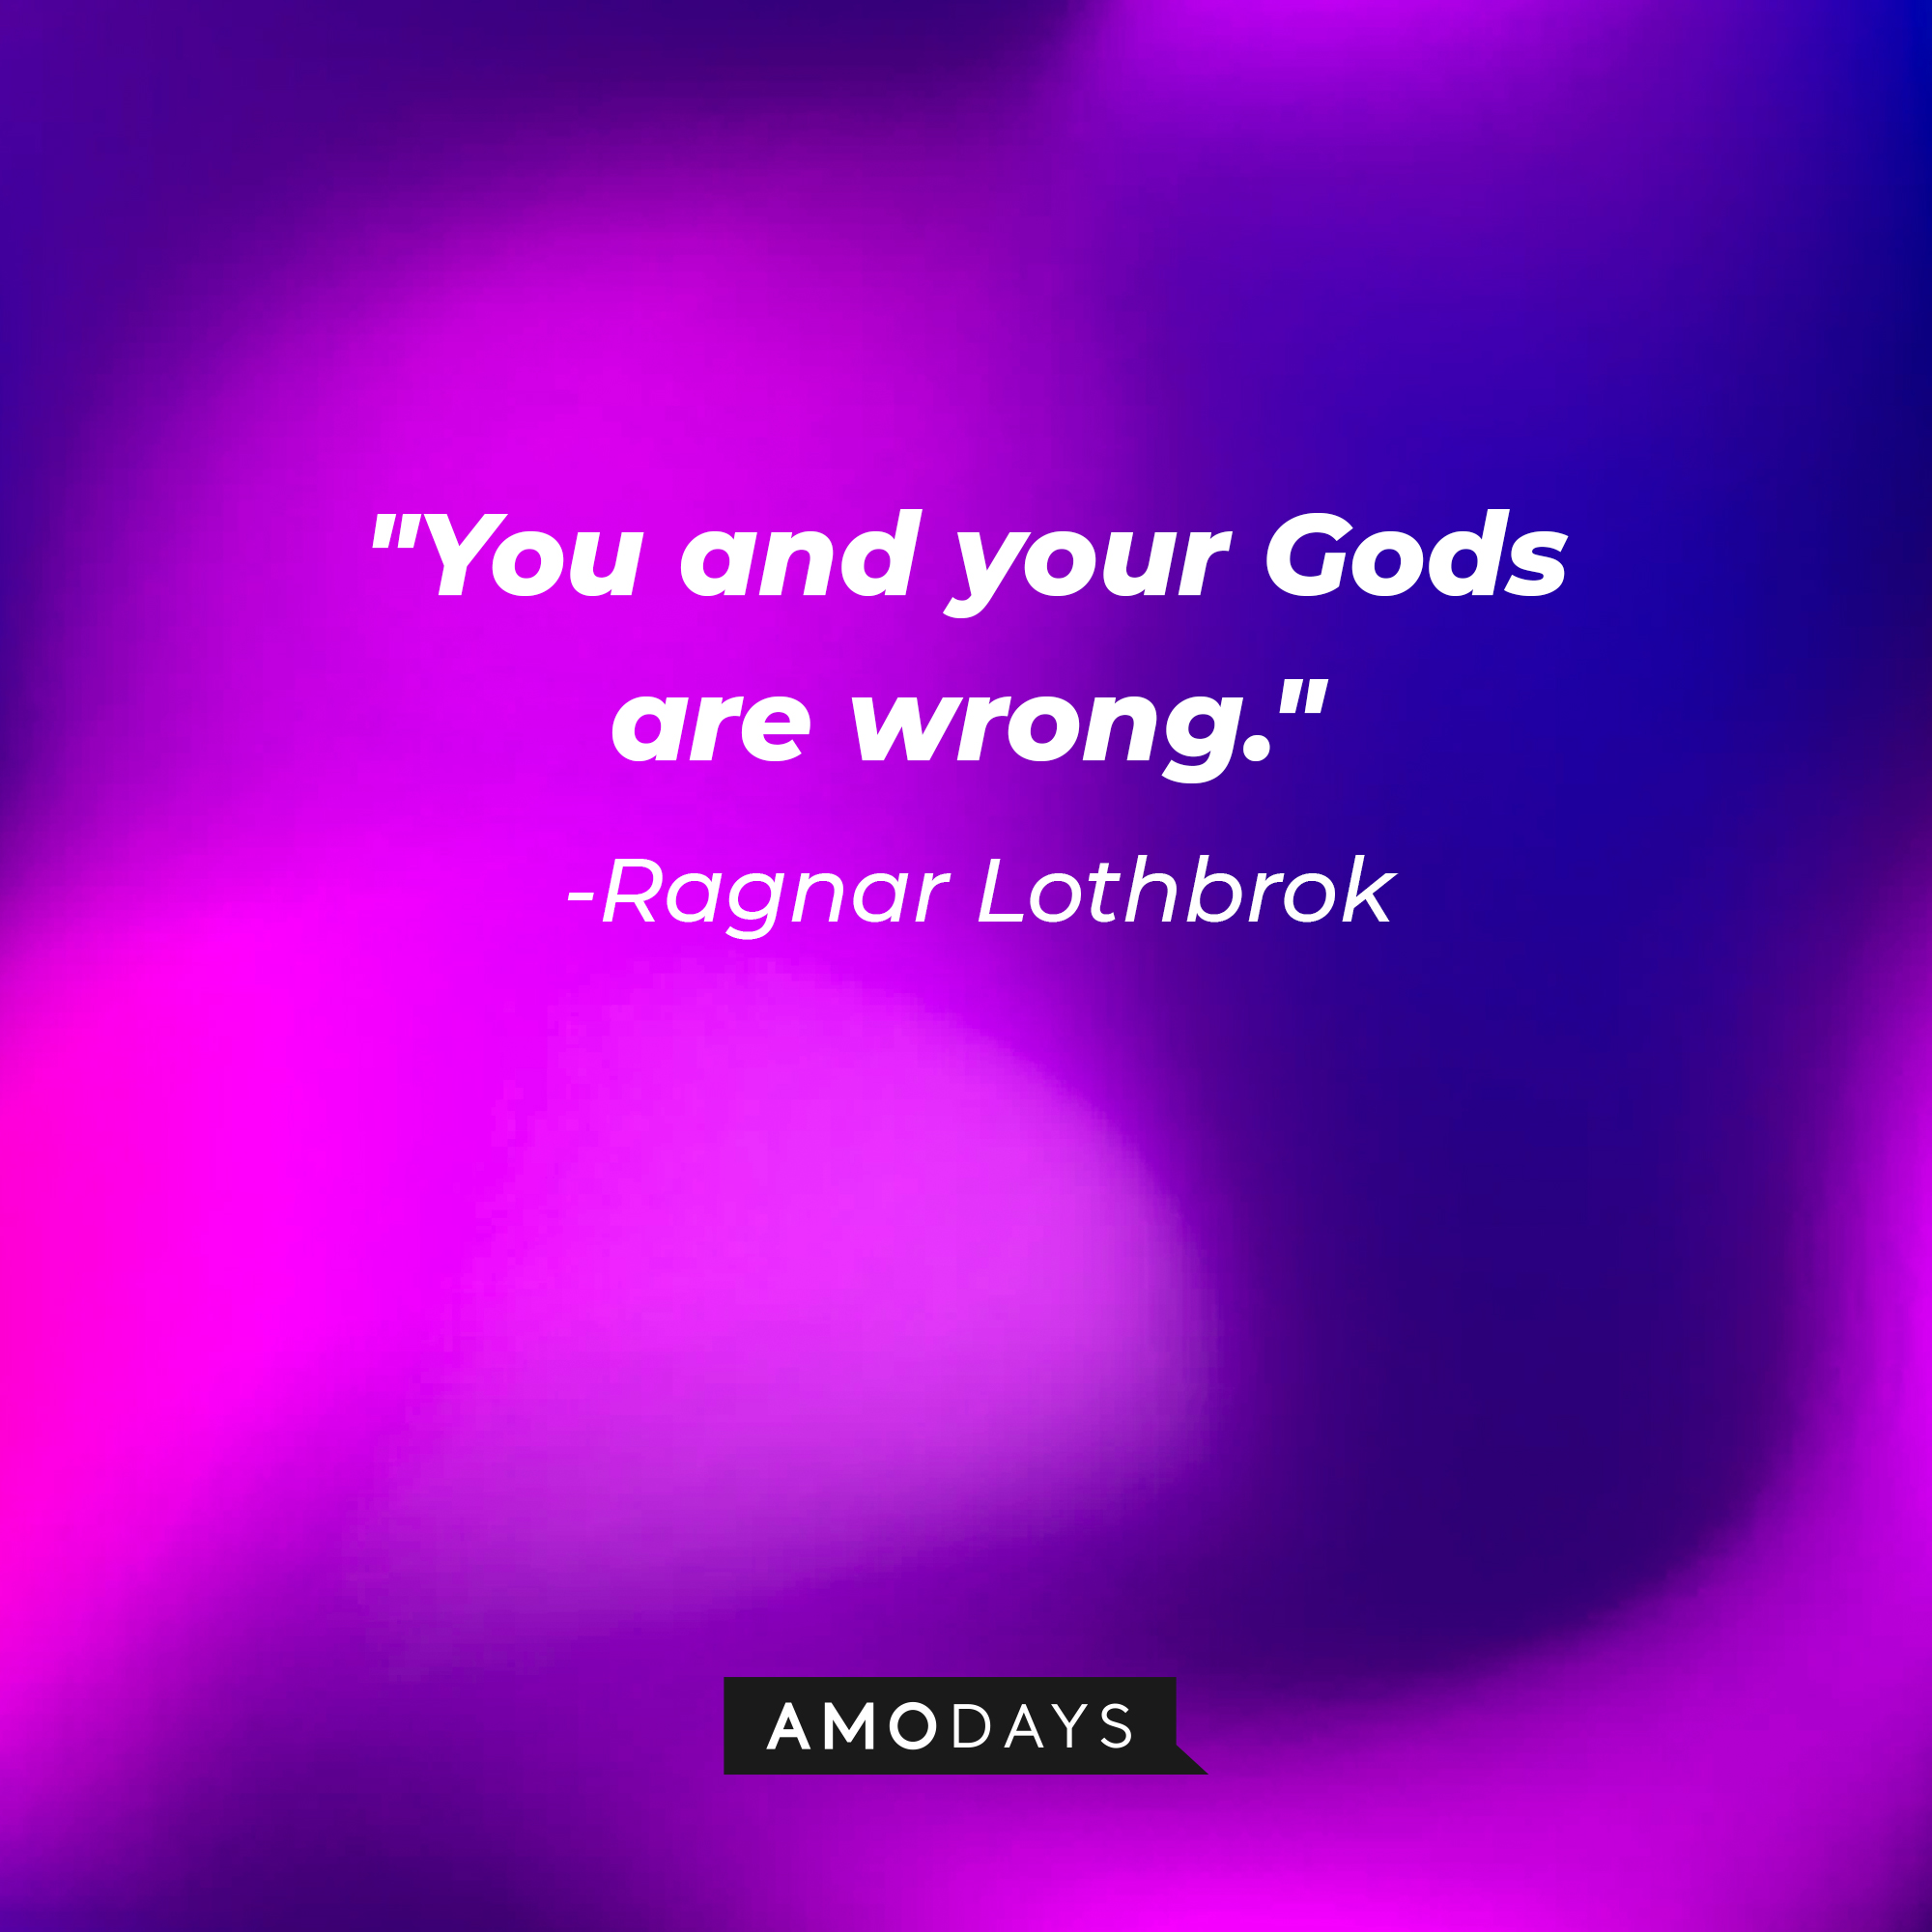 Ragnar Lothbrok's quote: "You and your Gods are wrong." | Source: Amodays